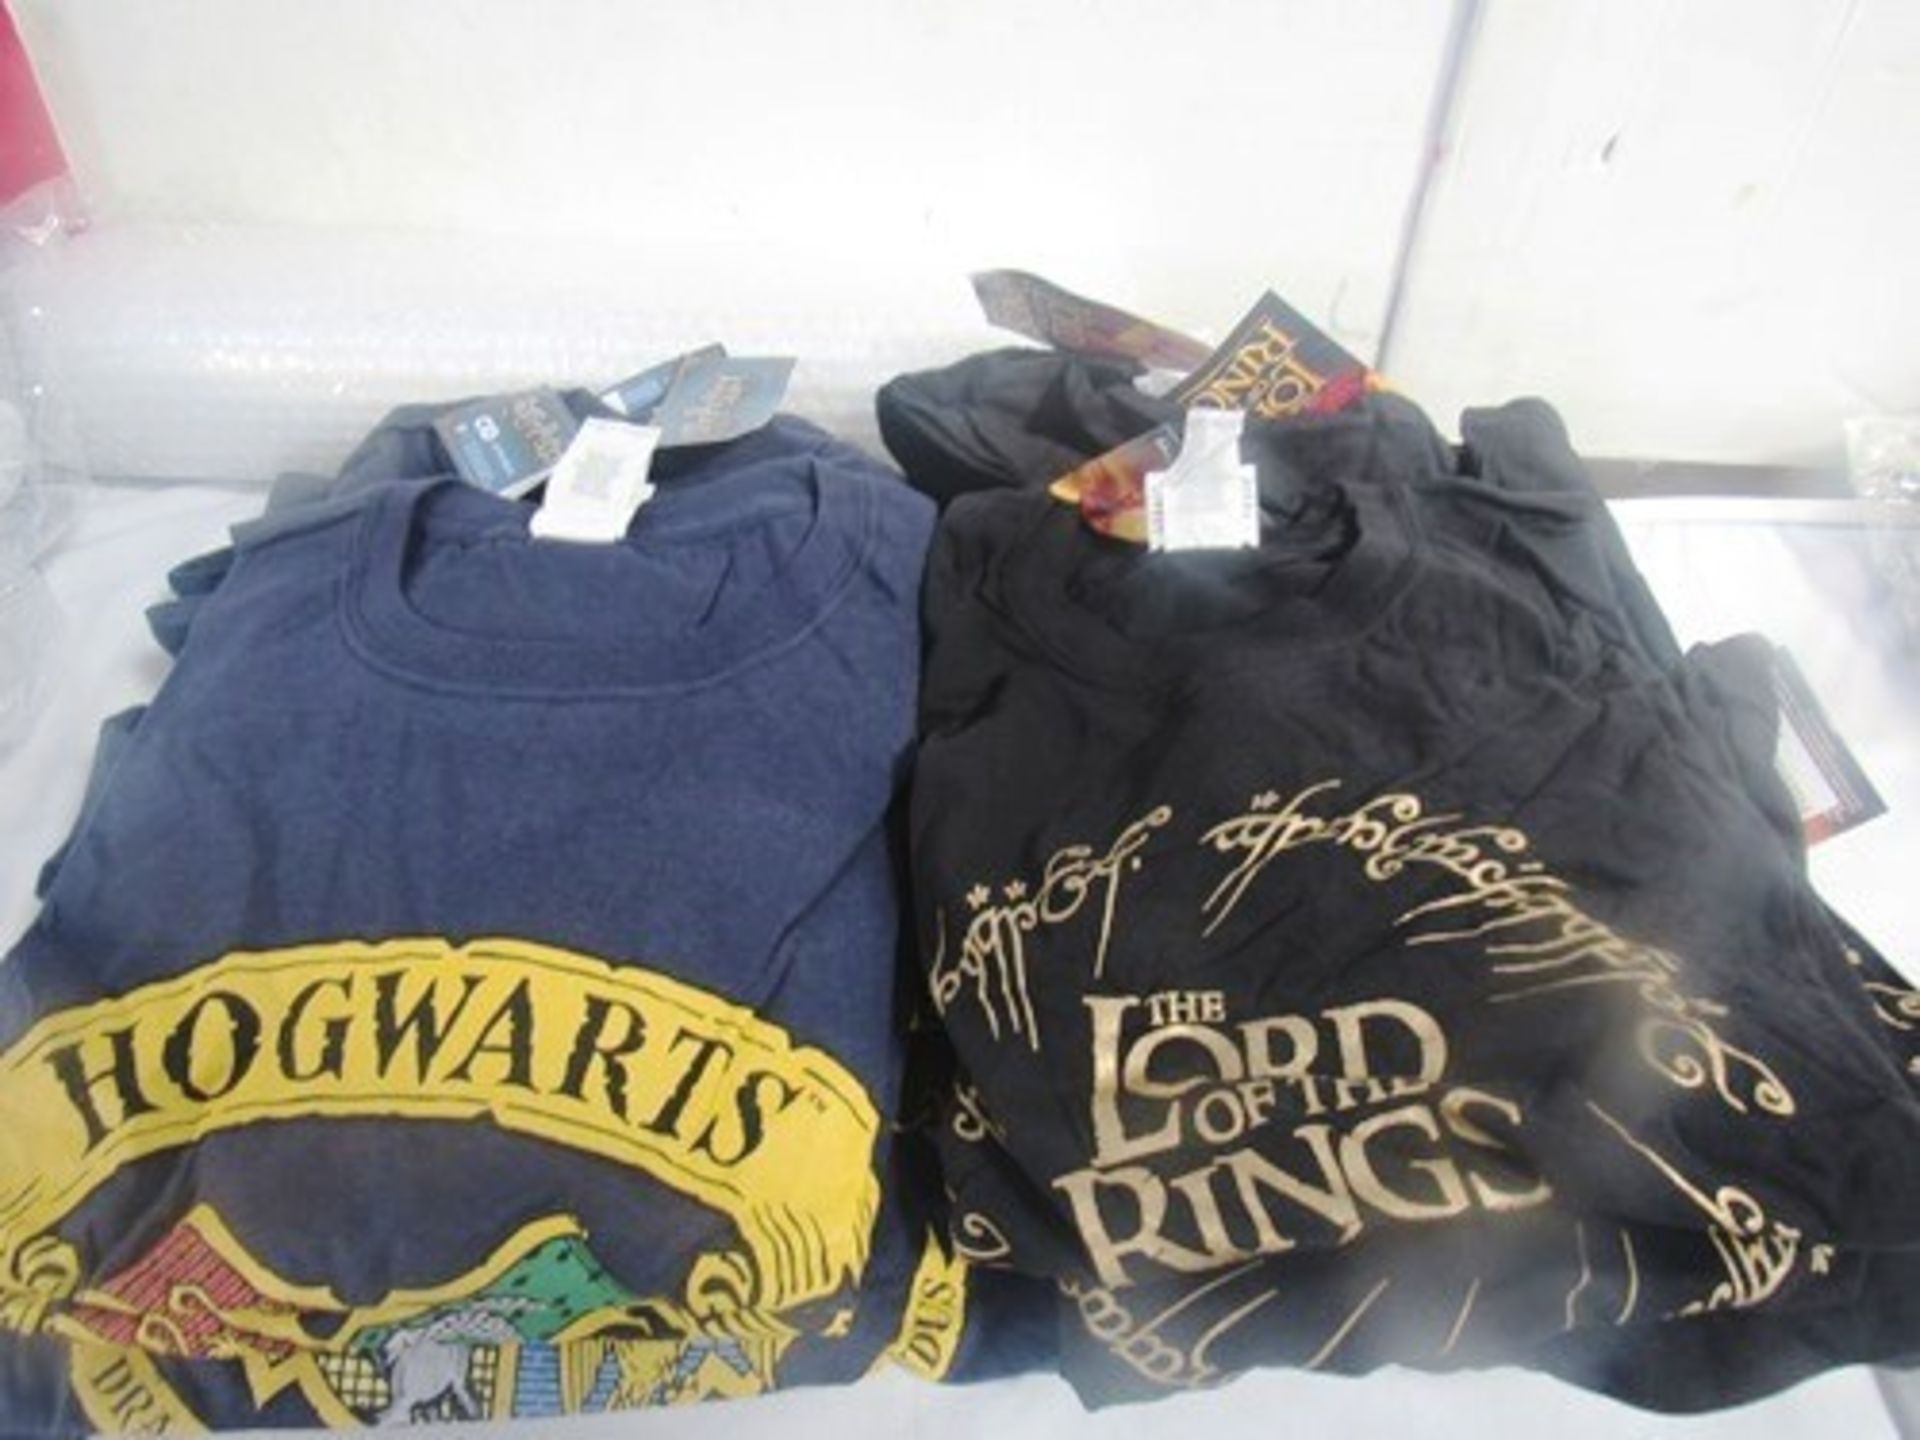 14 x novelty t-shirts, Harry Potter and Lord of the Rings, size S. M and L - New with tags (ES16A)